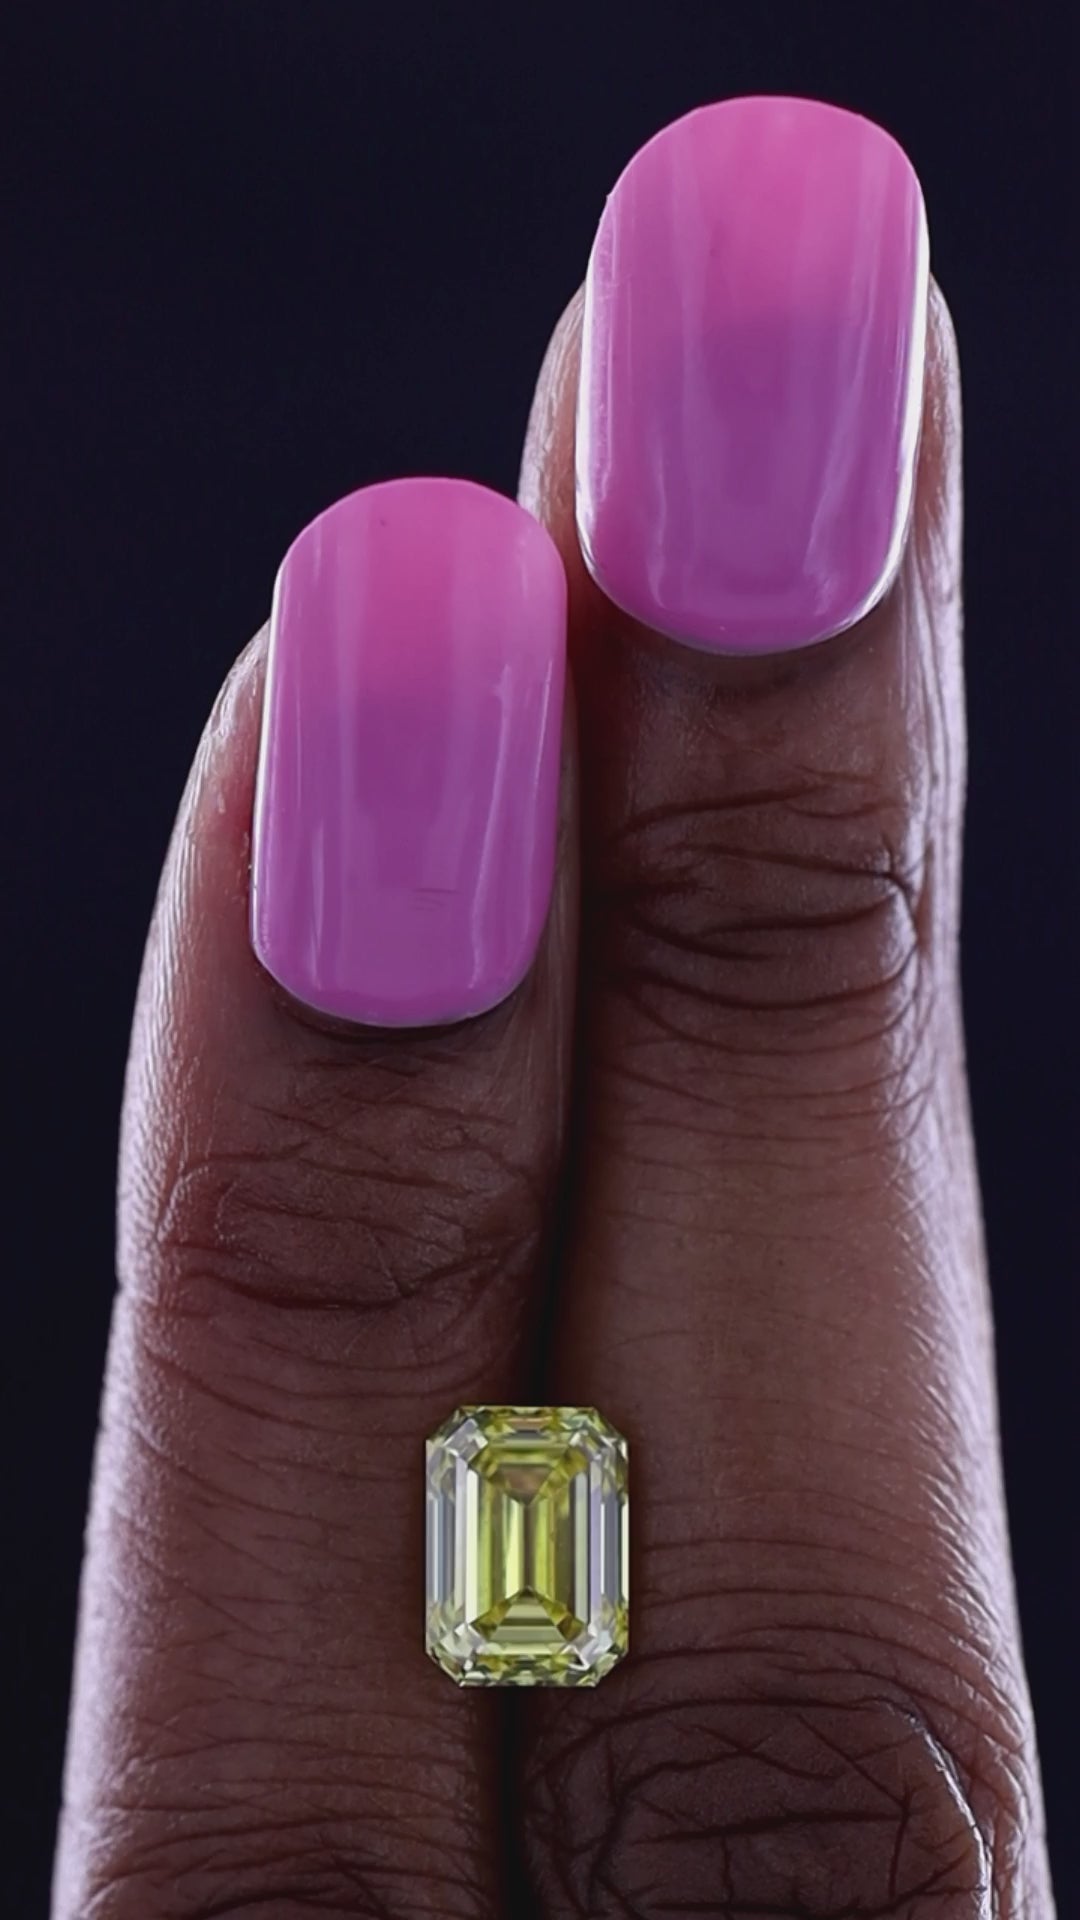 From the depths of Botswana’s mineral-rich earth, where the landscape stretches into an infinite horizon, comes an extraordinary gem that captures the essence of the sun itself—a 3.01-carat Fancy Vivid Yellow diamond. 